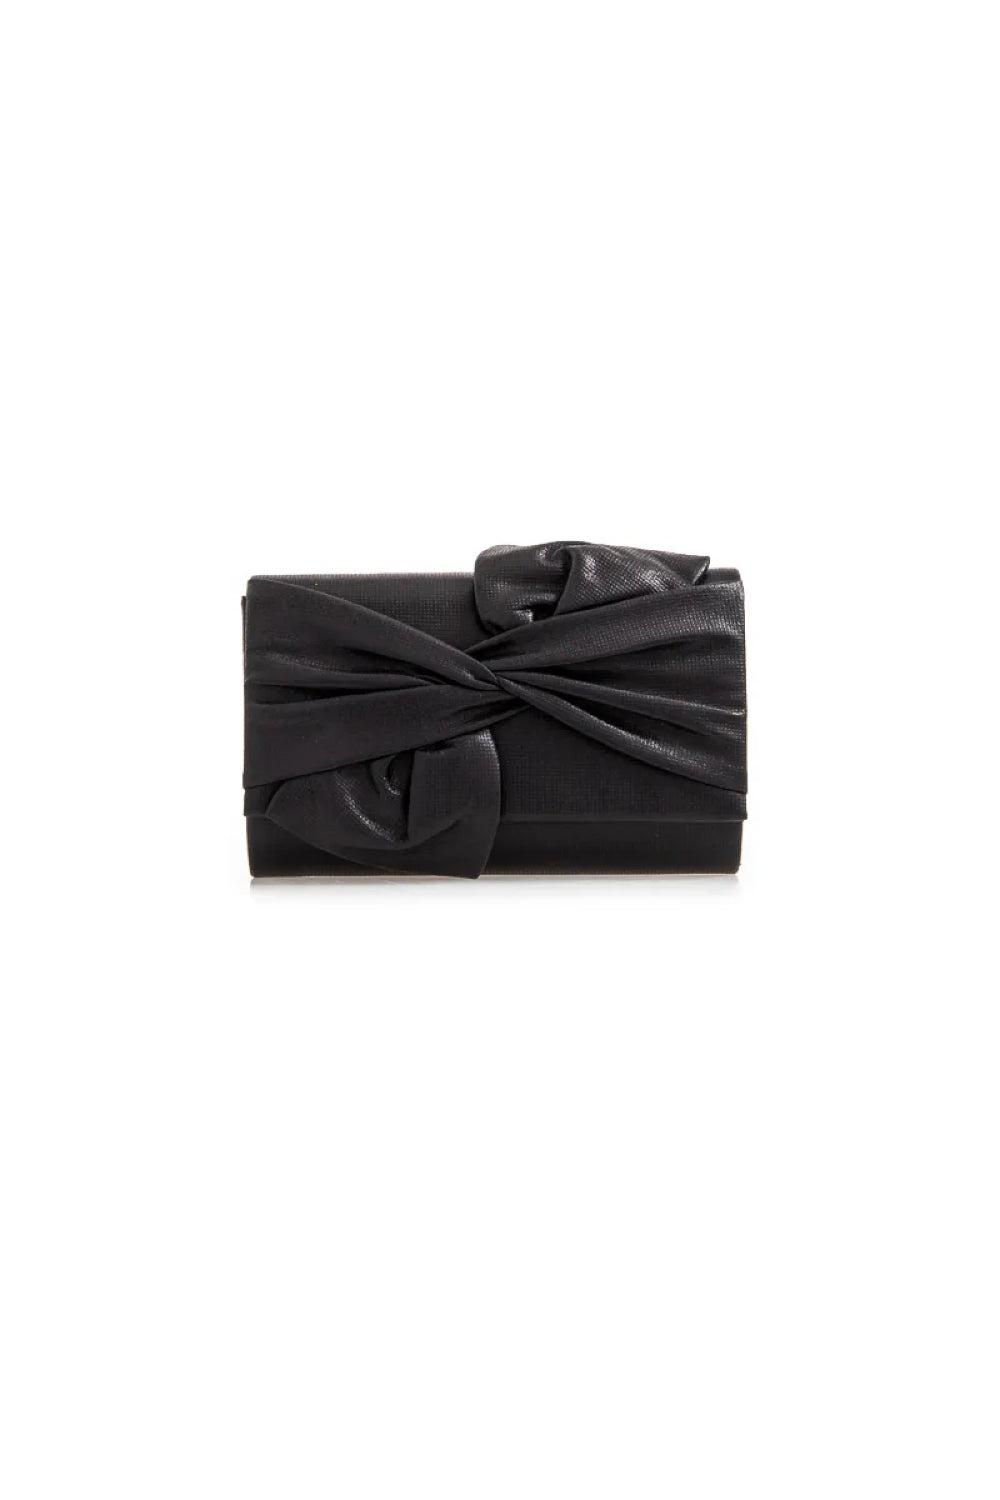 Black Evening Clutch Bag with Bow Detail